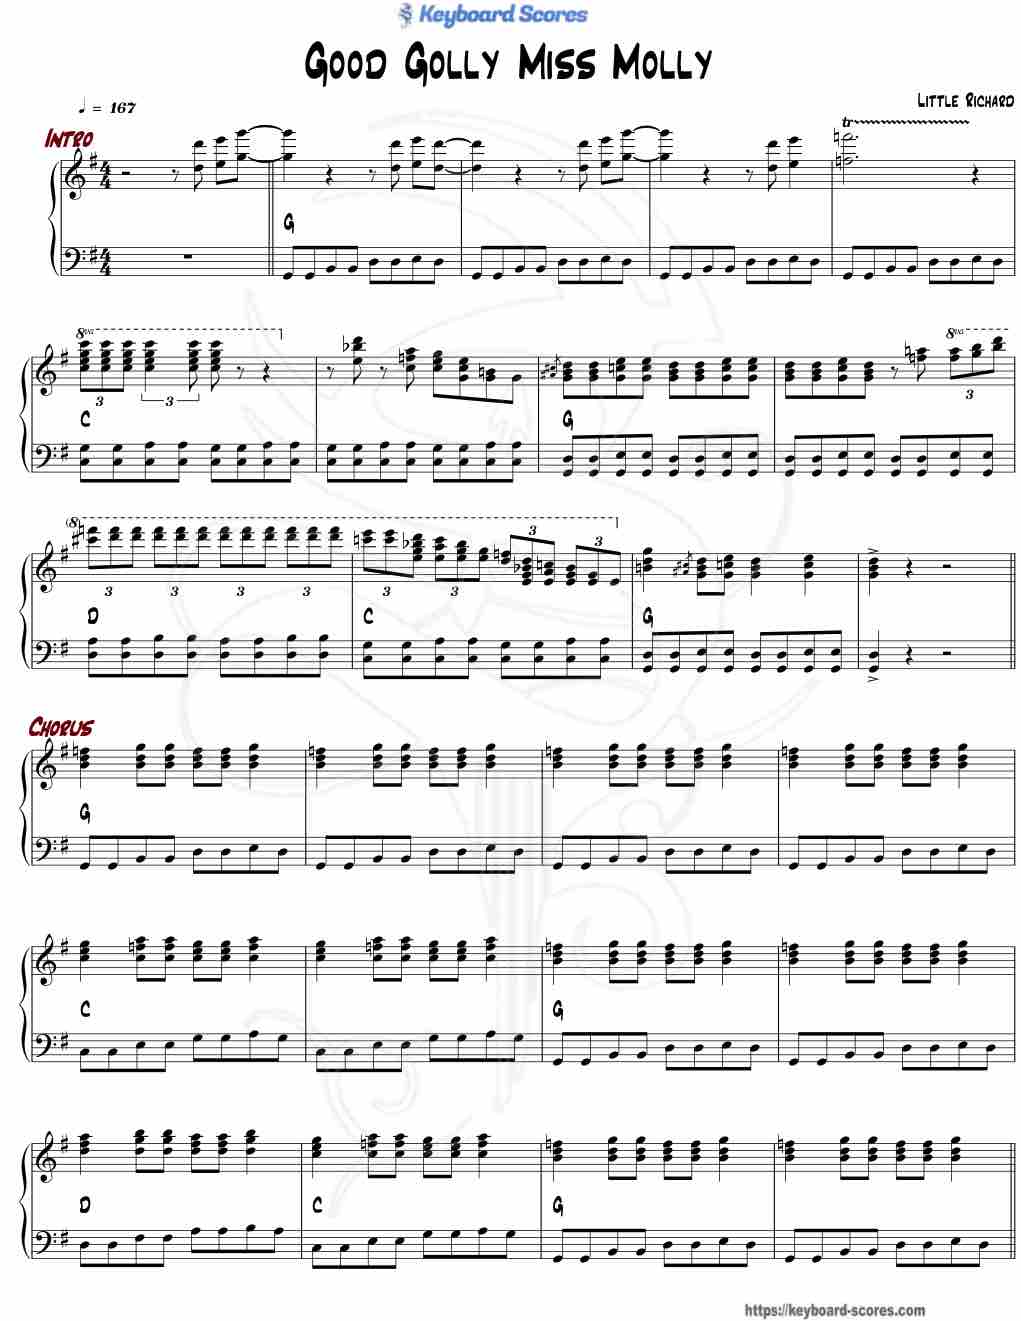 Good Golly, Miss Molly - Little Richard - Score for Piano - Music Sheet